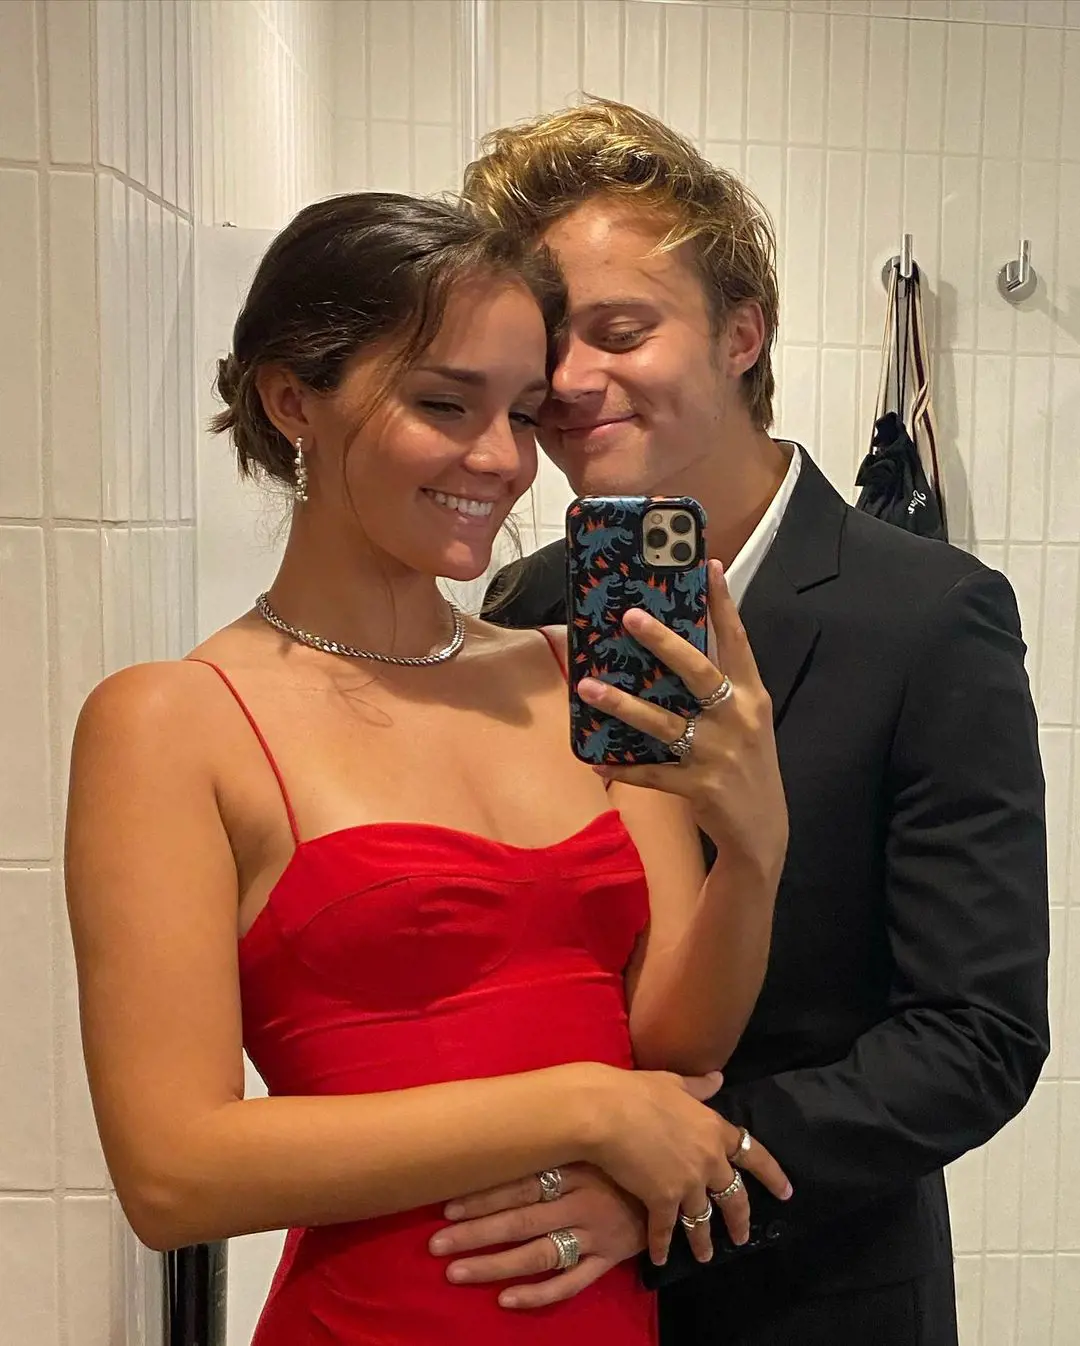 The lovebirds take a mirror selfie with Siemek looking gorgeous in a red dress while her beau donned a suit in as they had a fun night full of dancing in September 2021 in New York City 